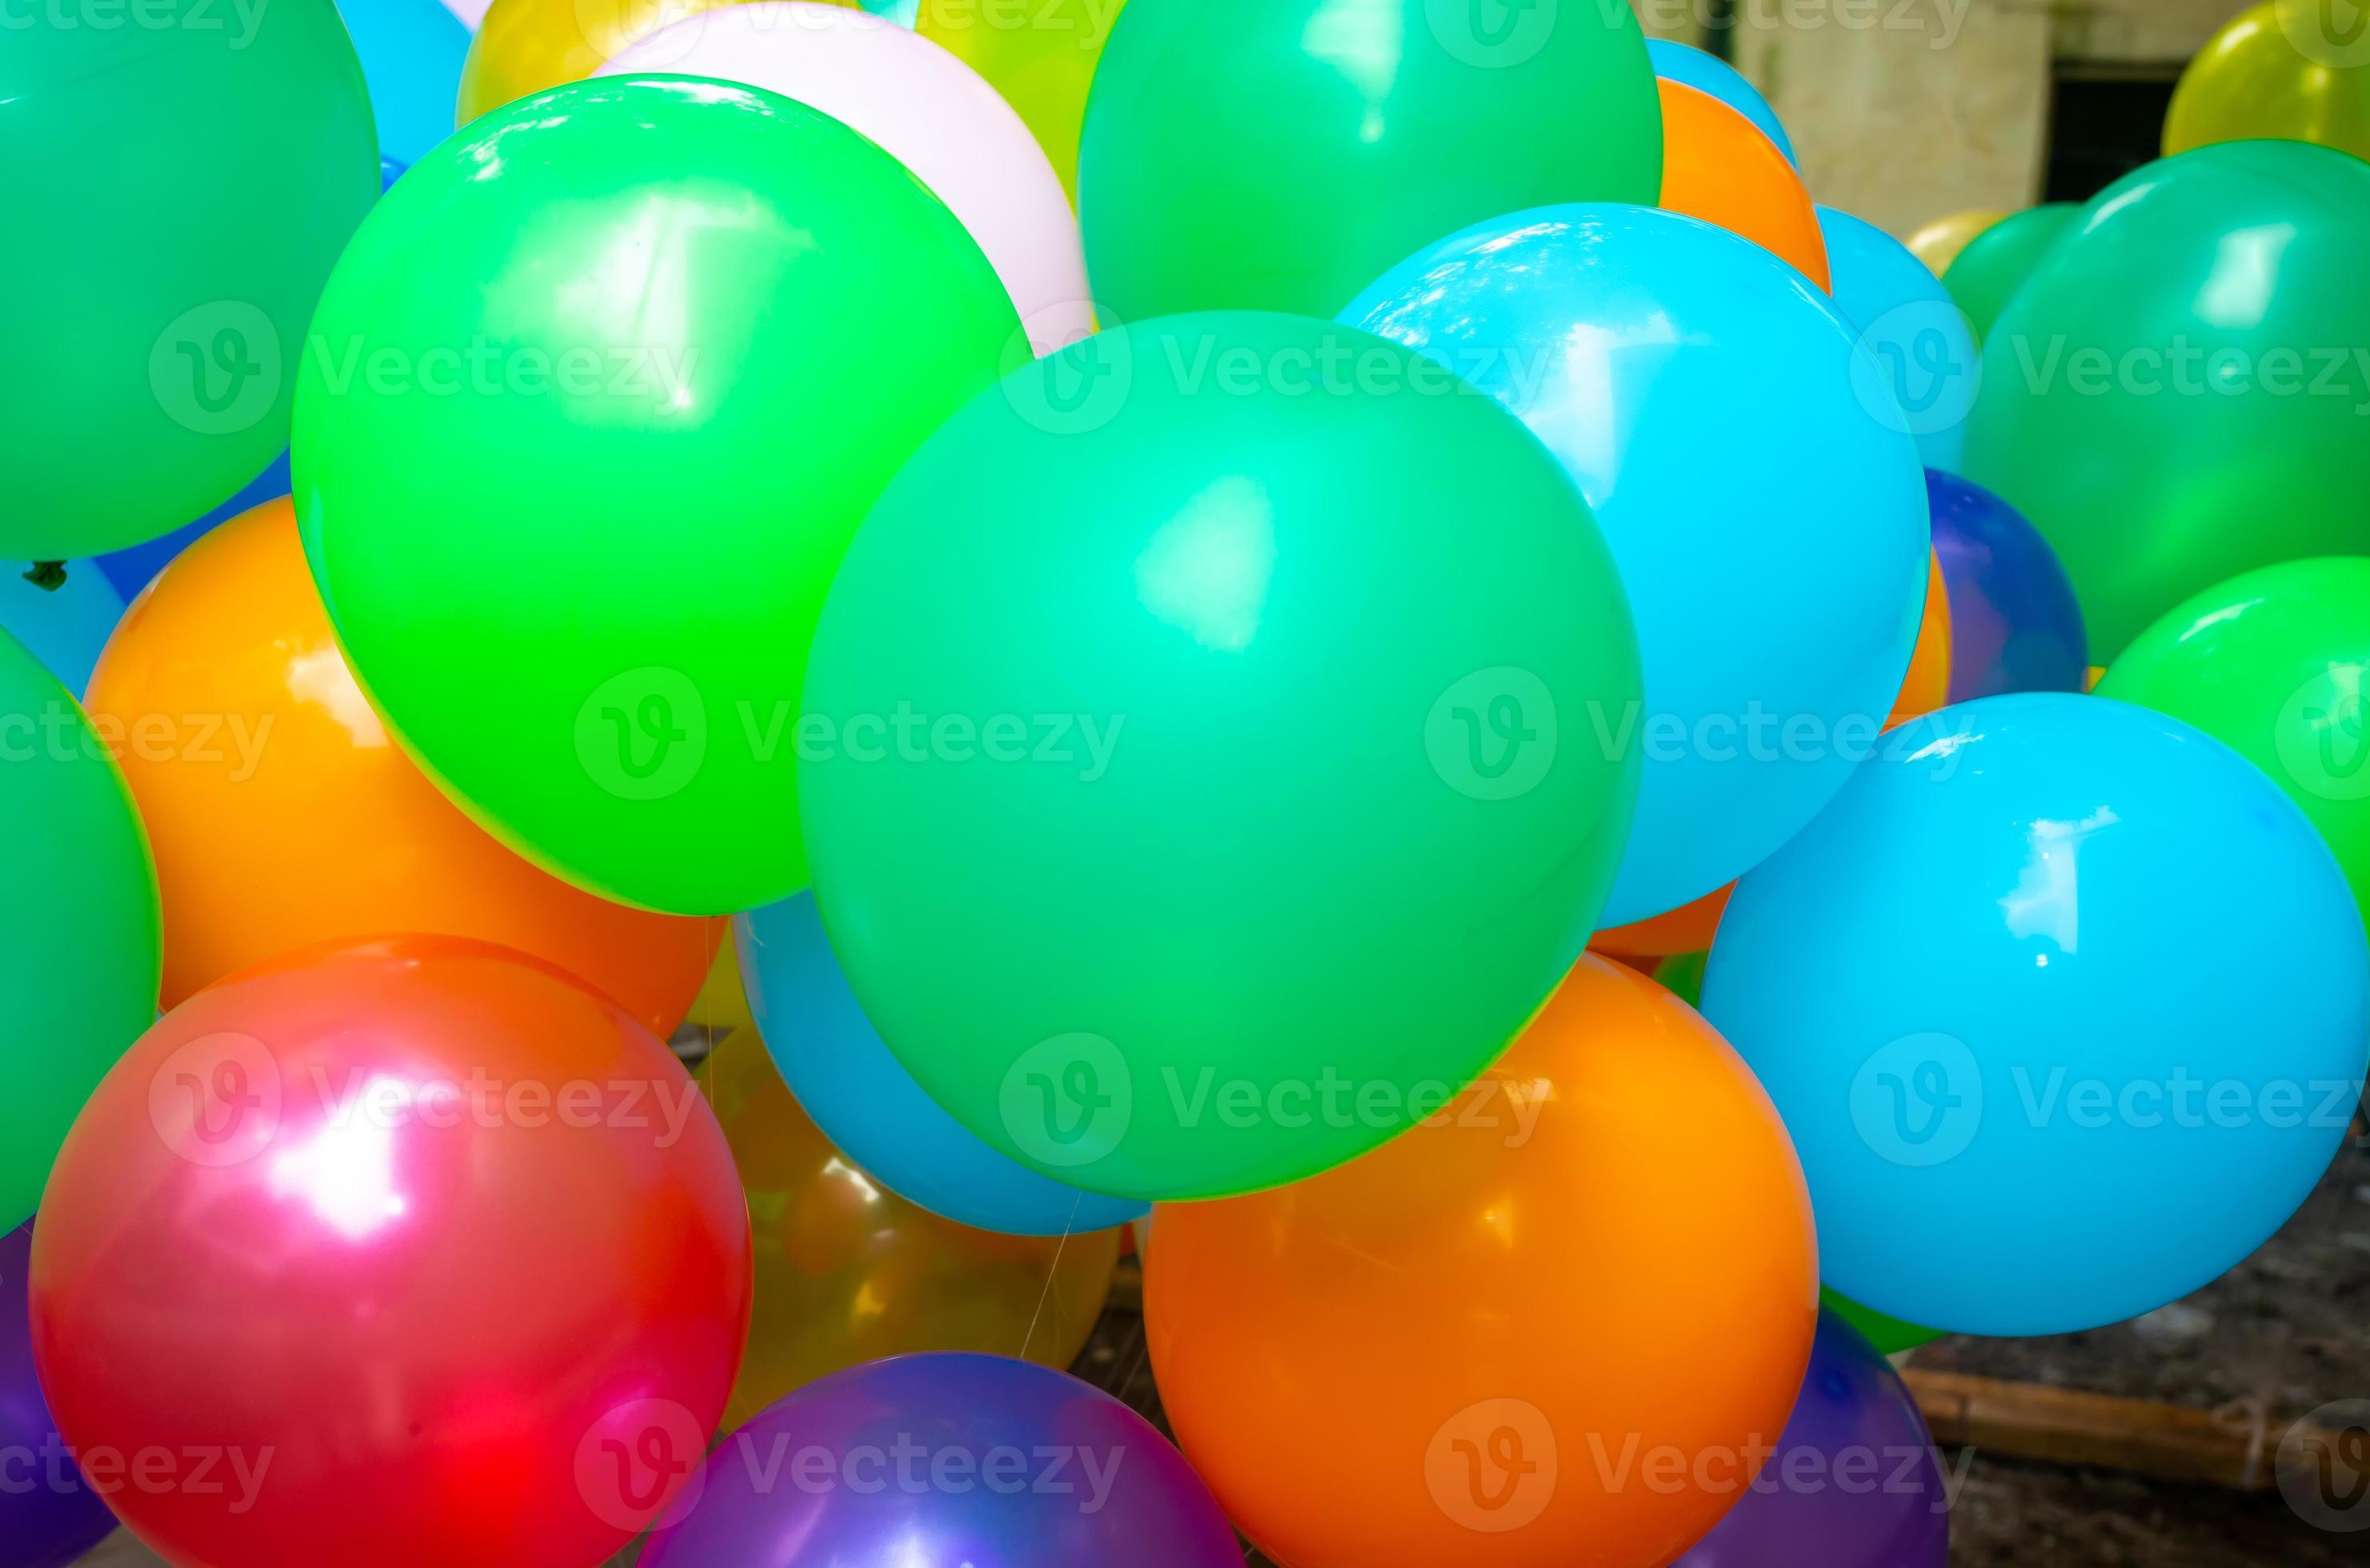 The colored gas-filled balloons attached to the yarn are flying. 22677296  Stock Photo at Vecteezy